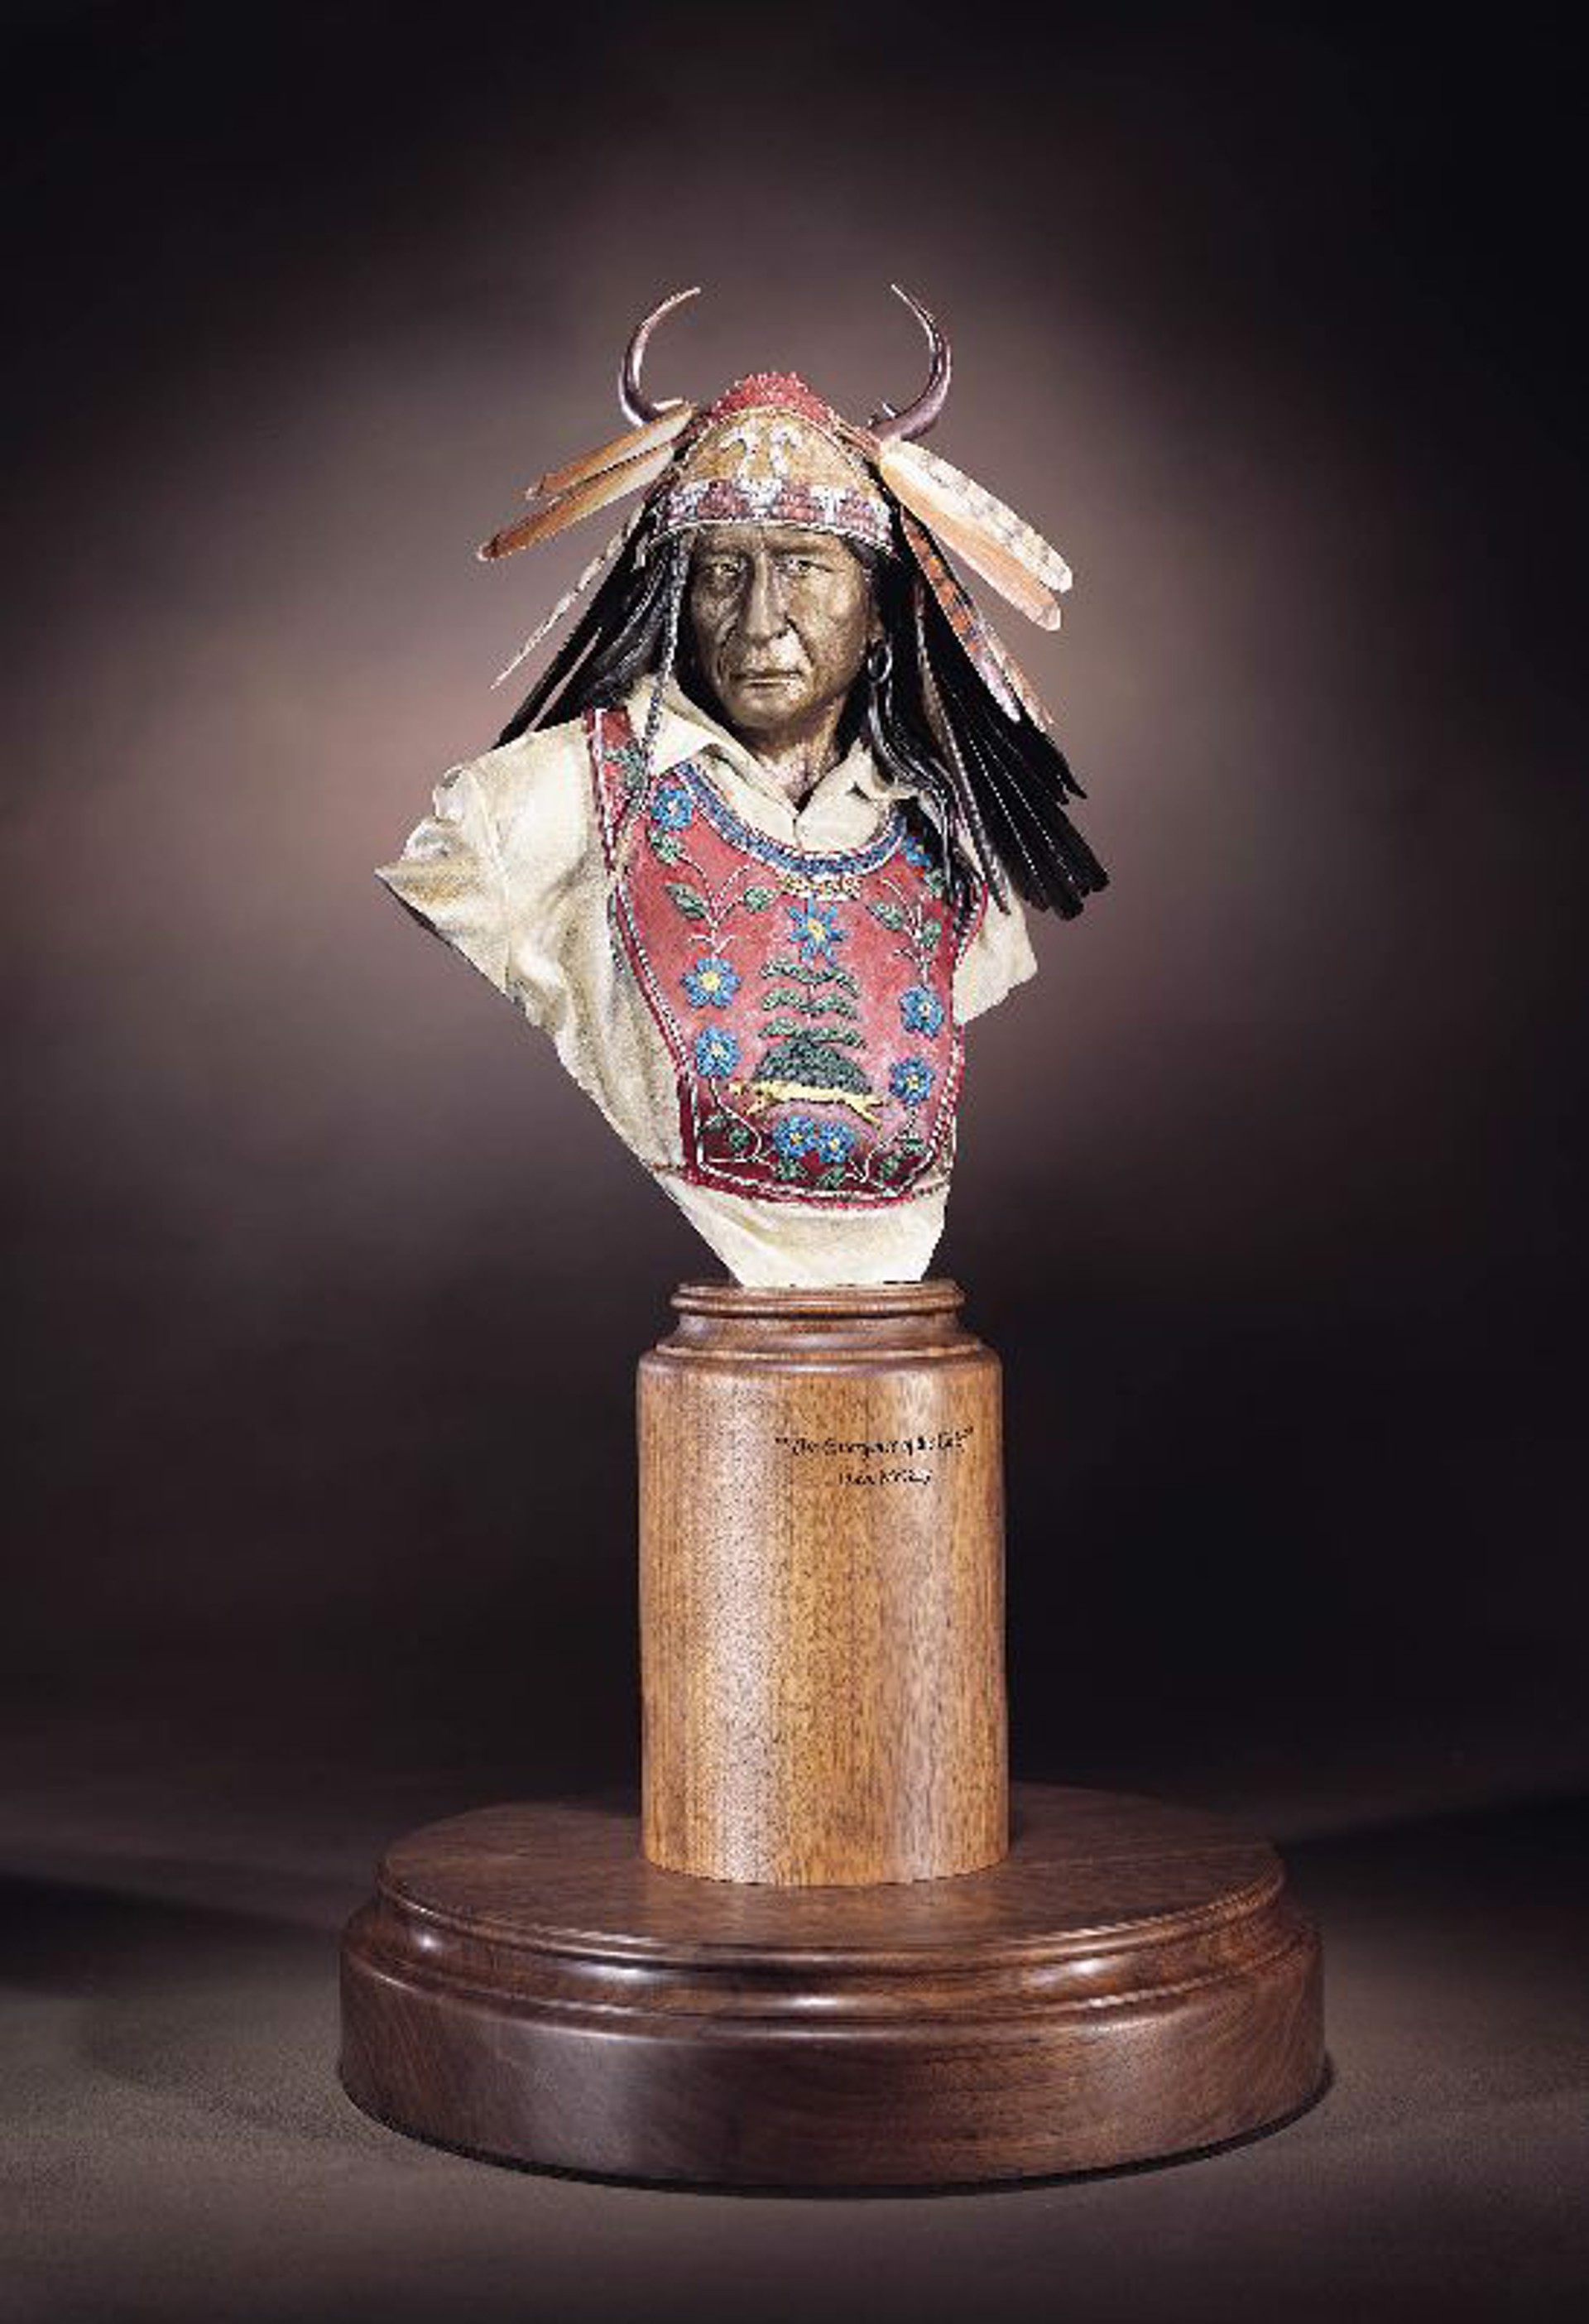 Emergence of the Chief (bust) by Dave McGary (sculptor) (1958-2013)